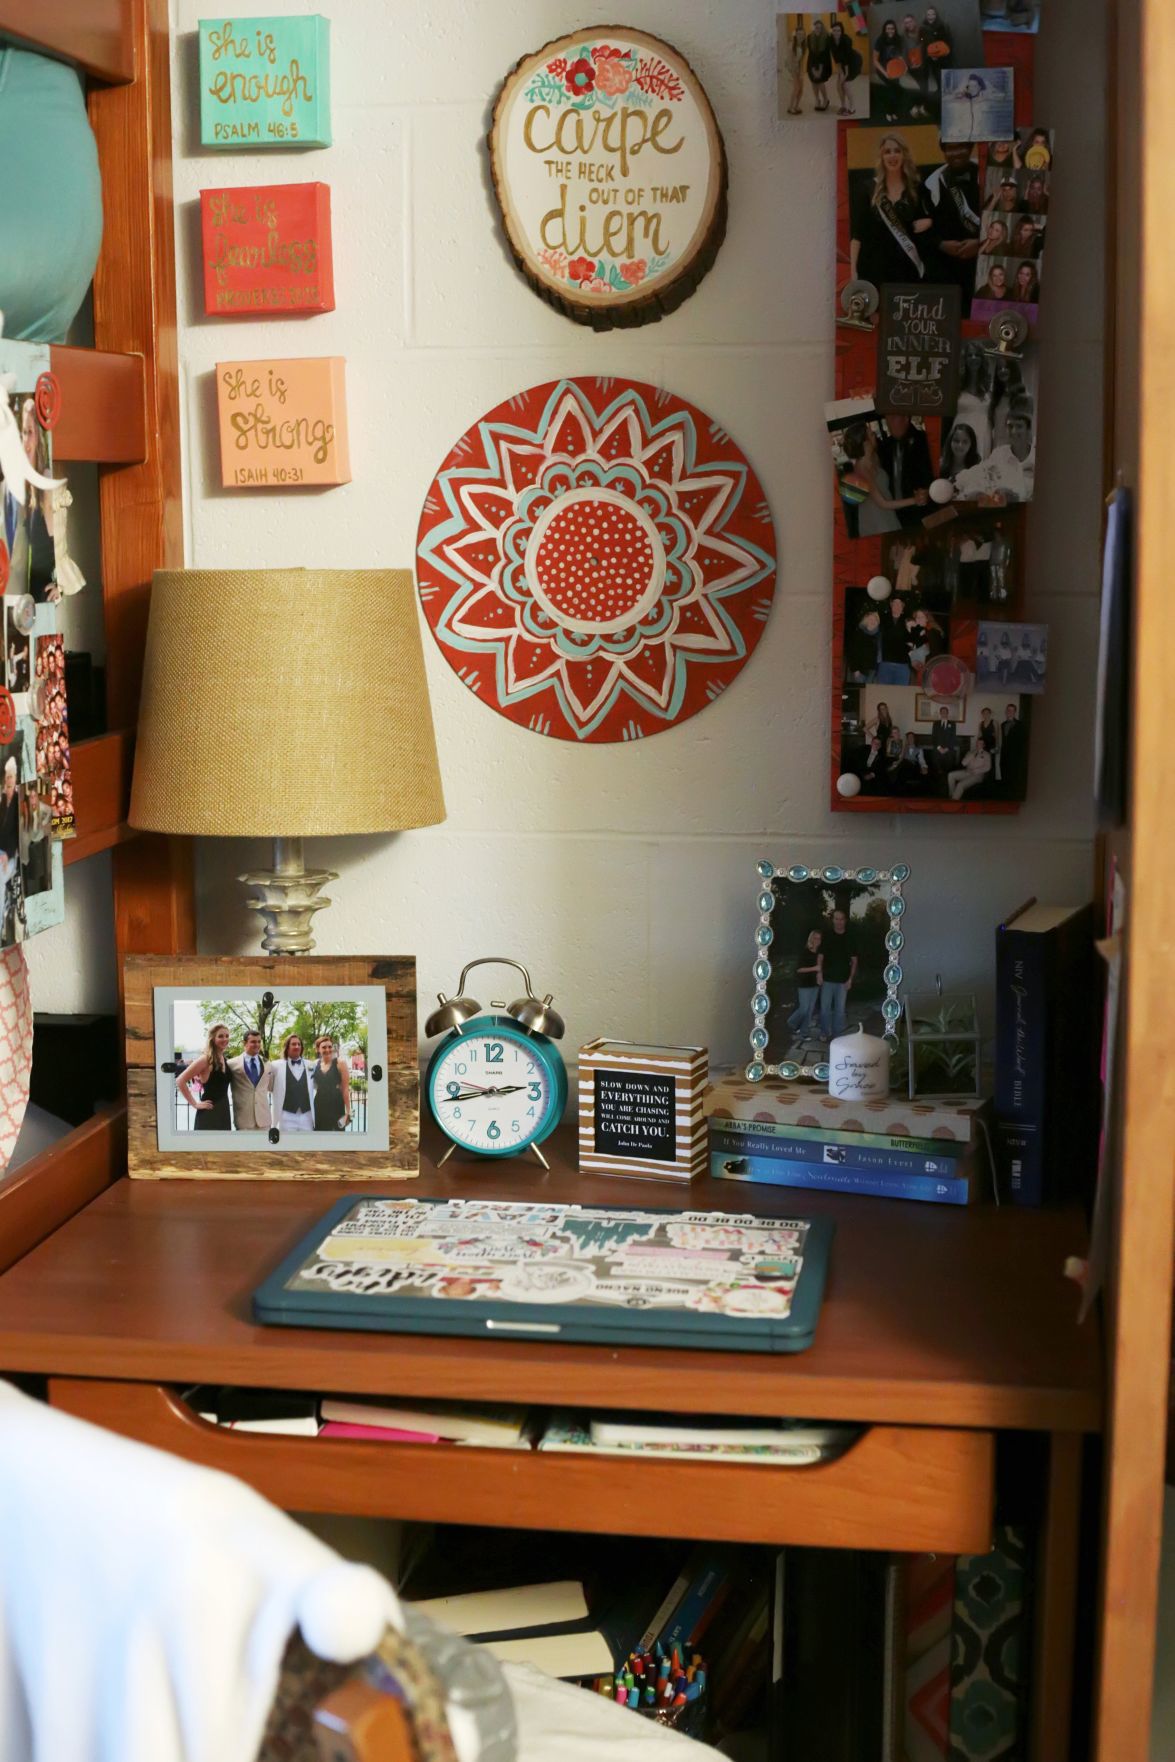 Express yourself with your dorm decor | Special Sections | omaha.com